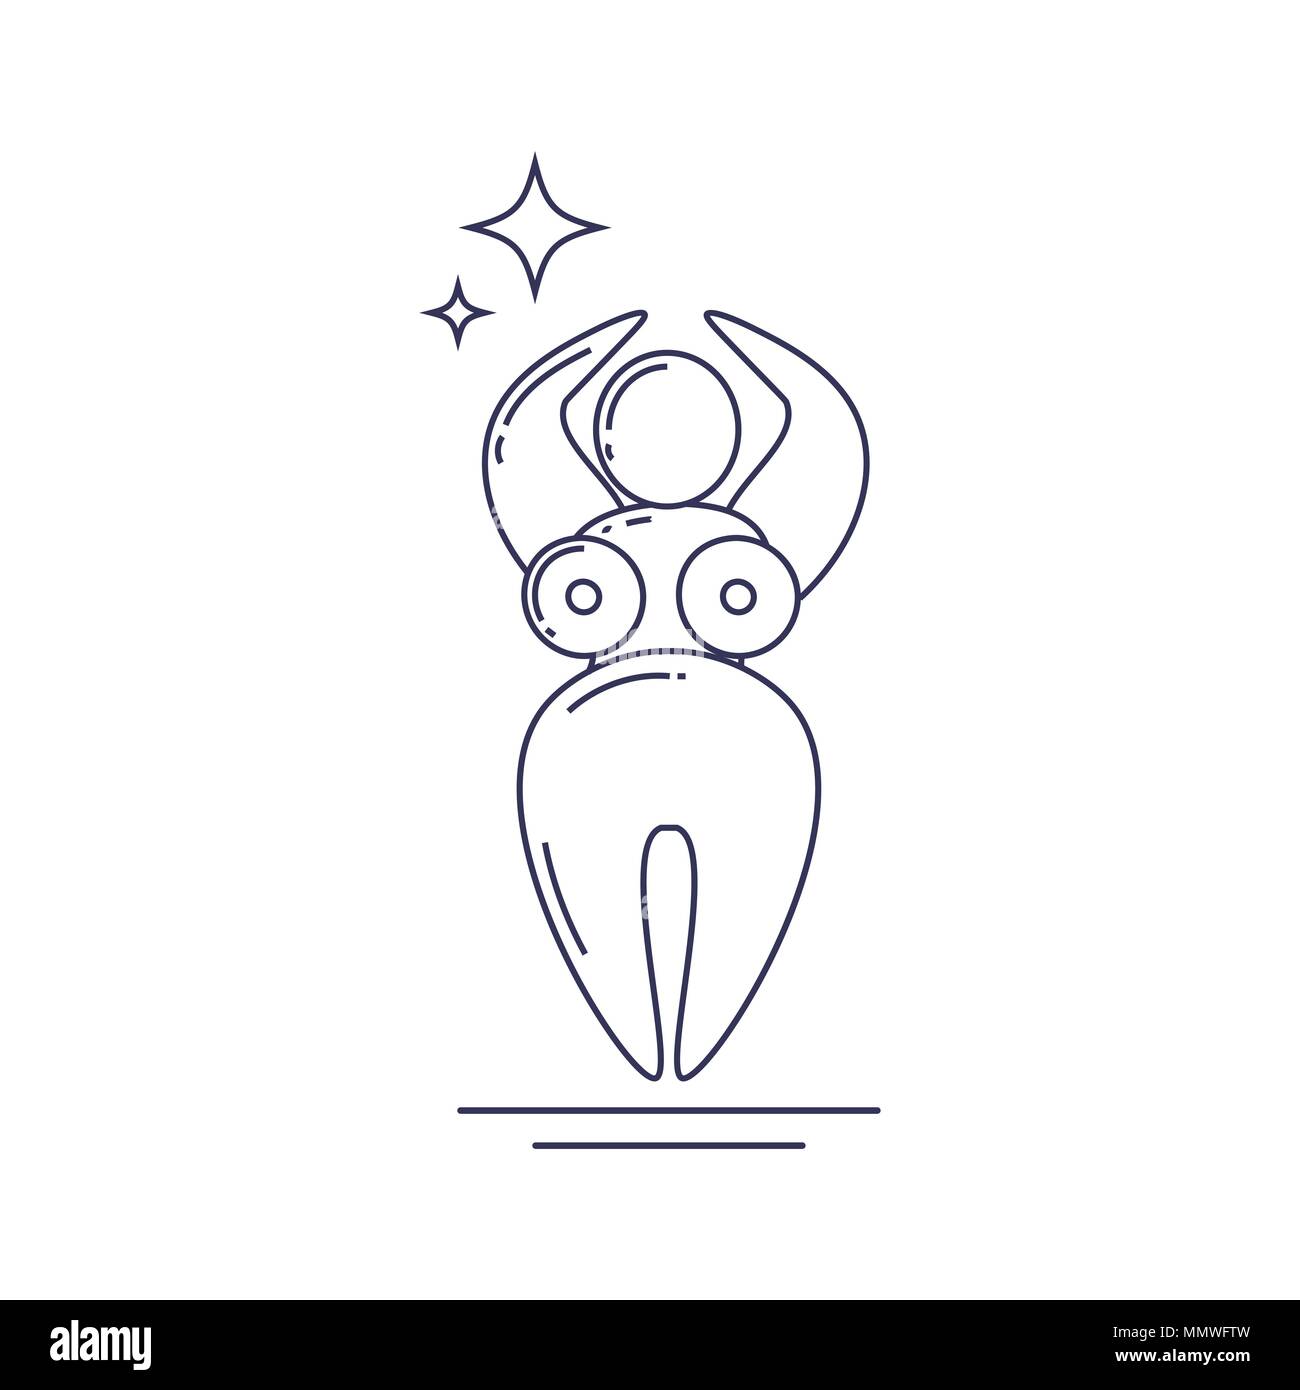 Vector illustration in a line art style of a Feminine Goddess, known as Mother Earth, Paleolithic Venus figurine, Anima Mundi or wiccan Gaia. Stock Vector